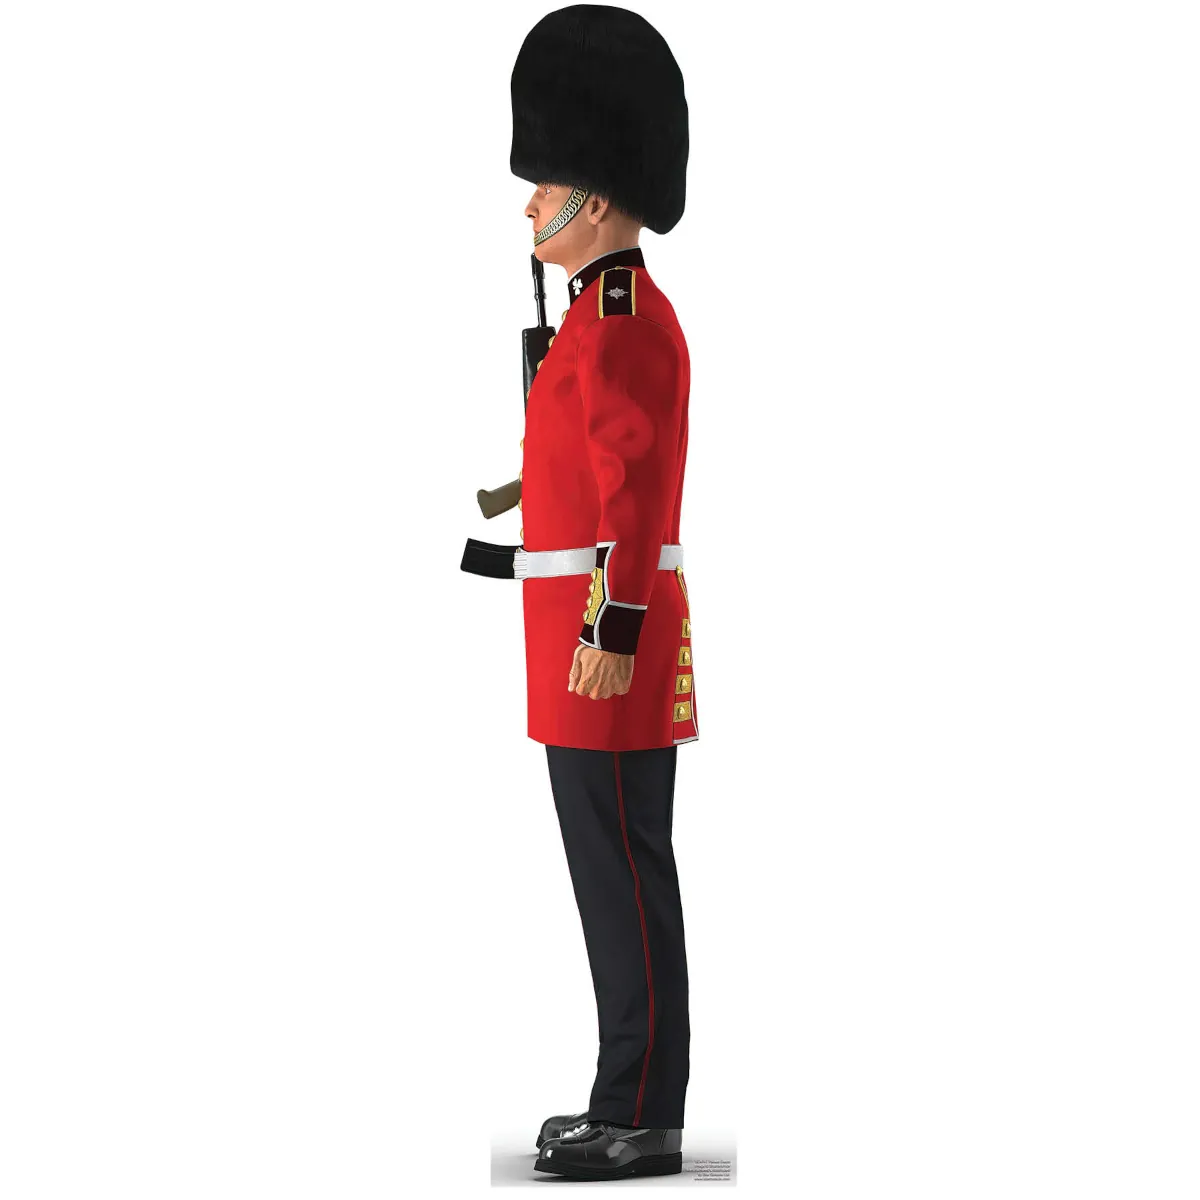 SC4141 Illustrated Palace Guard 'Facing Left' Mini Cardboard Cutout Standee Front